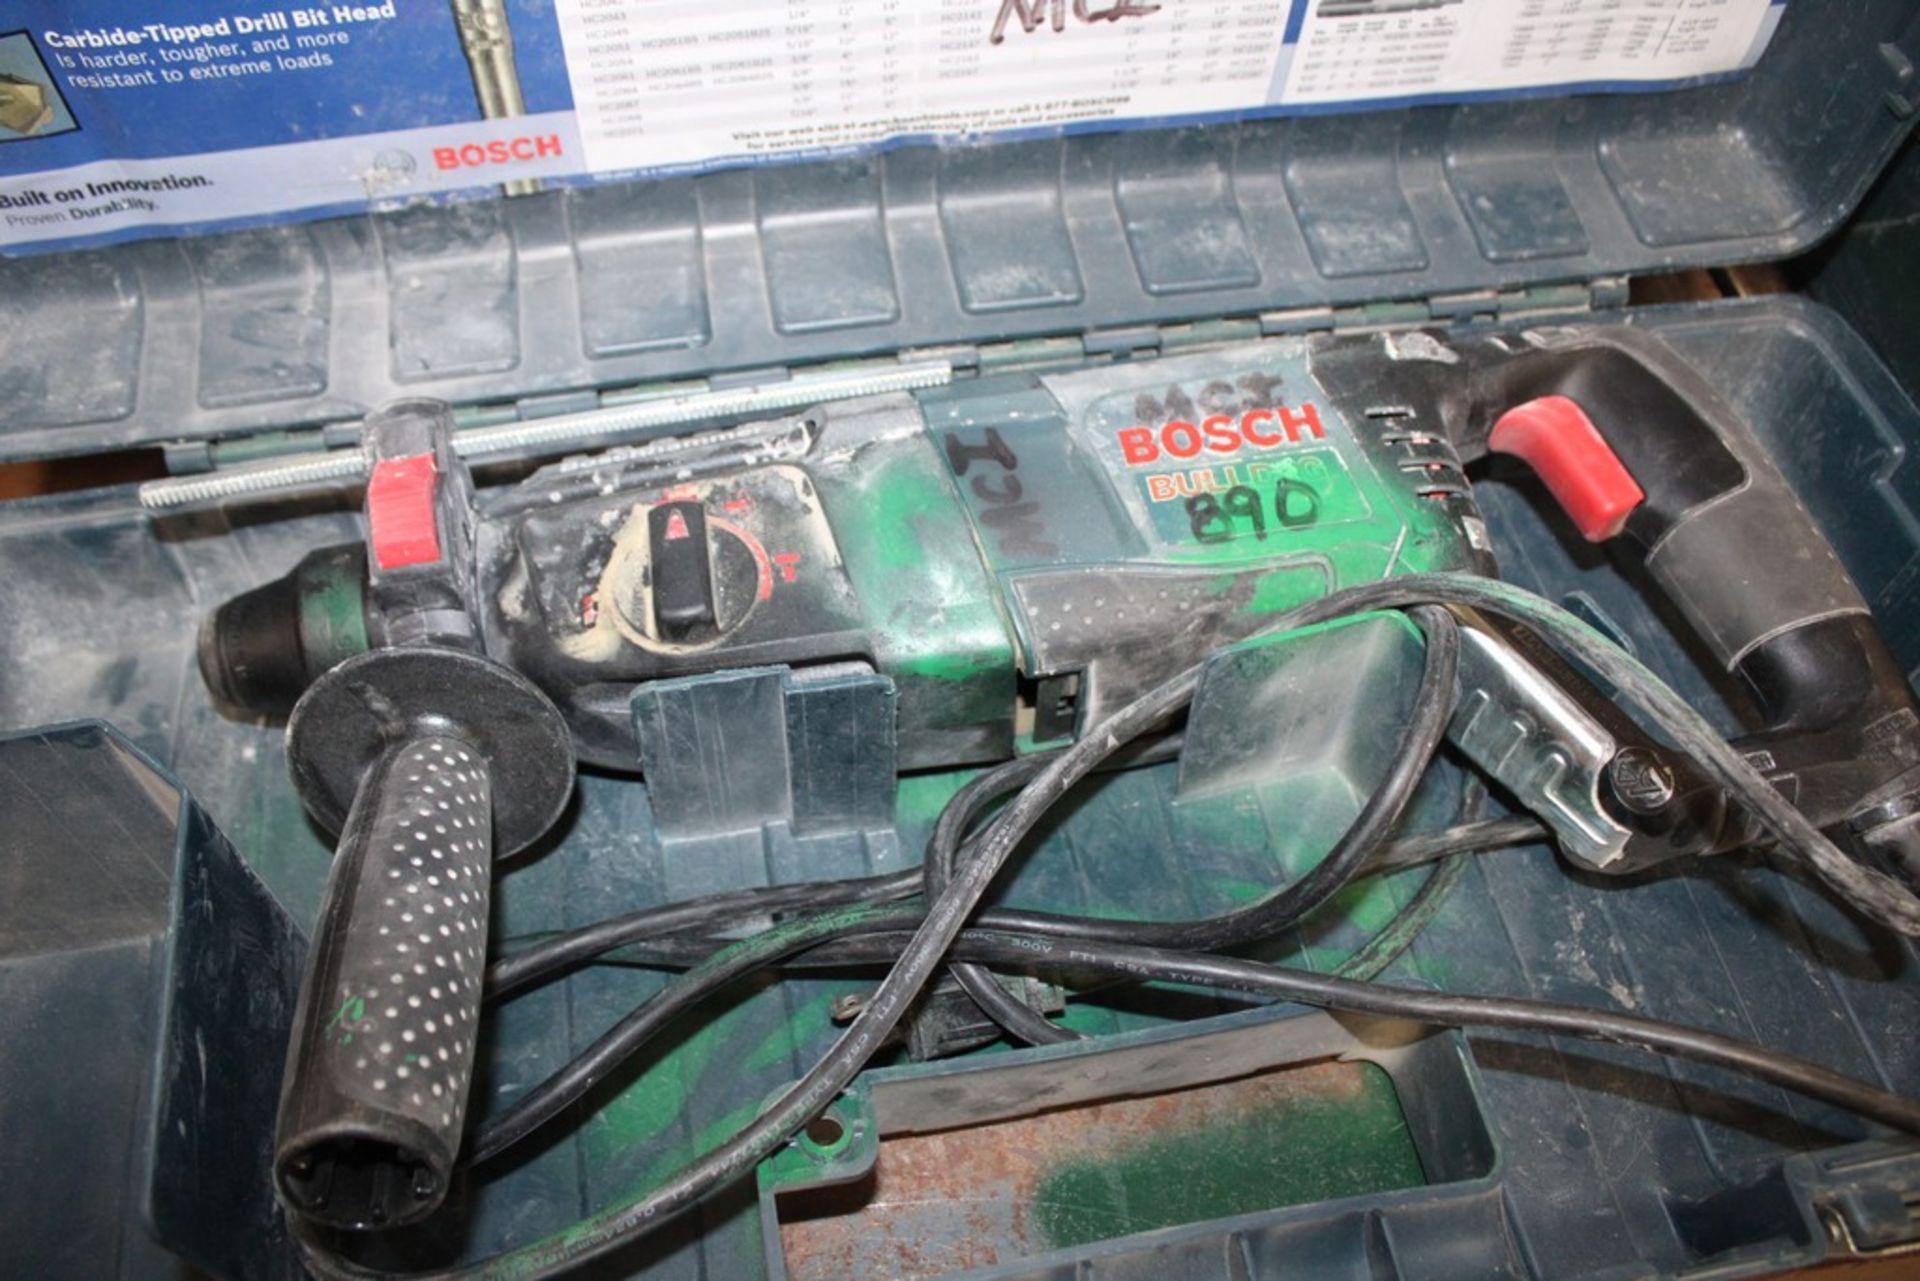 BOSCH MODEL 11255VSR ROTARY HAMMER WITH CASE - Image 2 of 2